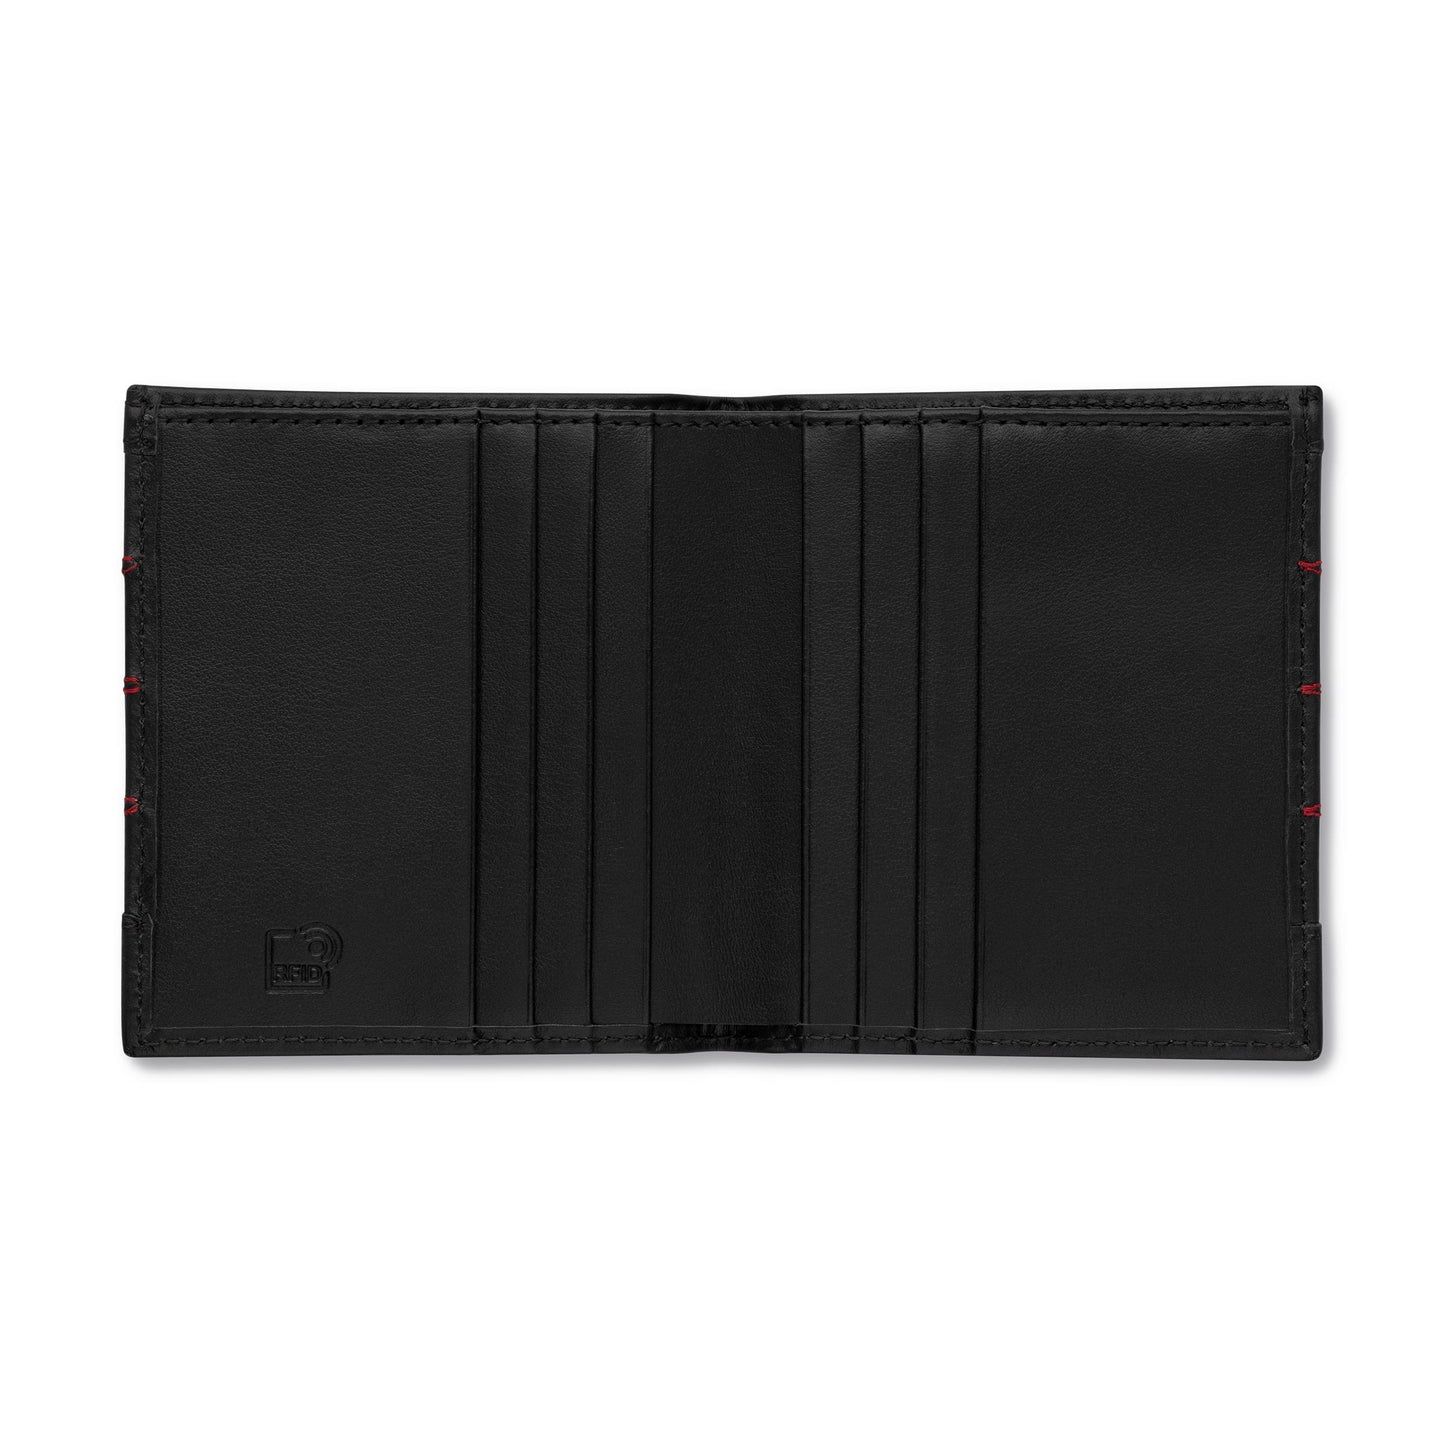 Audi Sport wallet leather small, mens, black-red